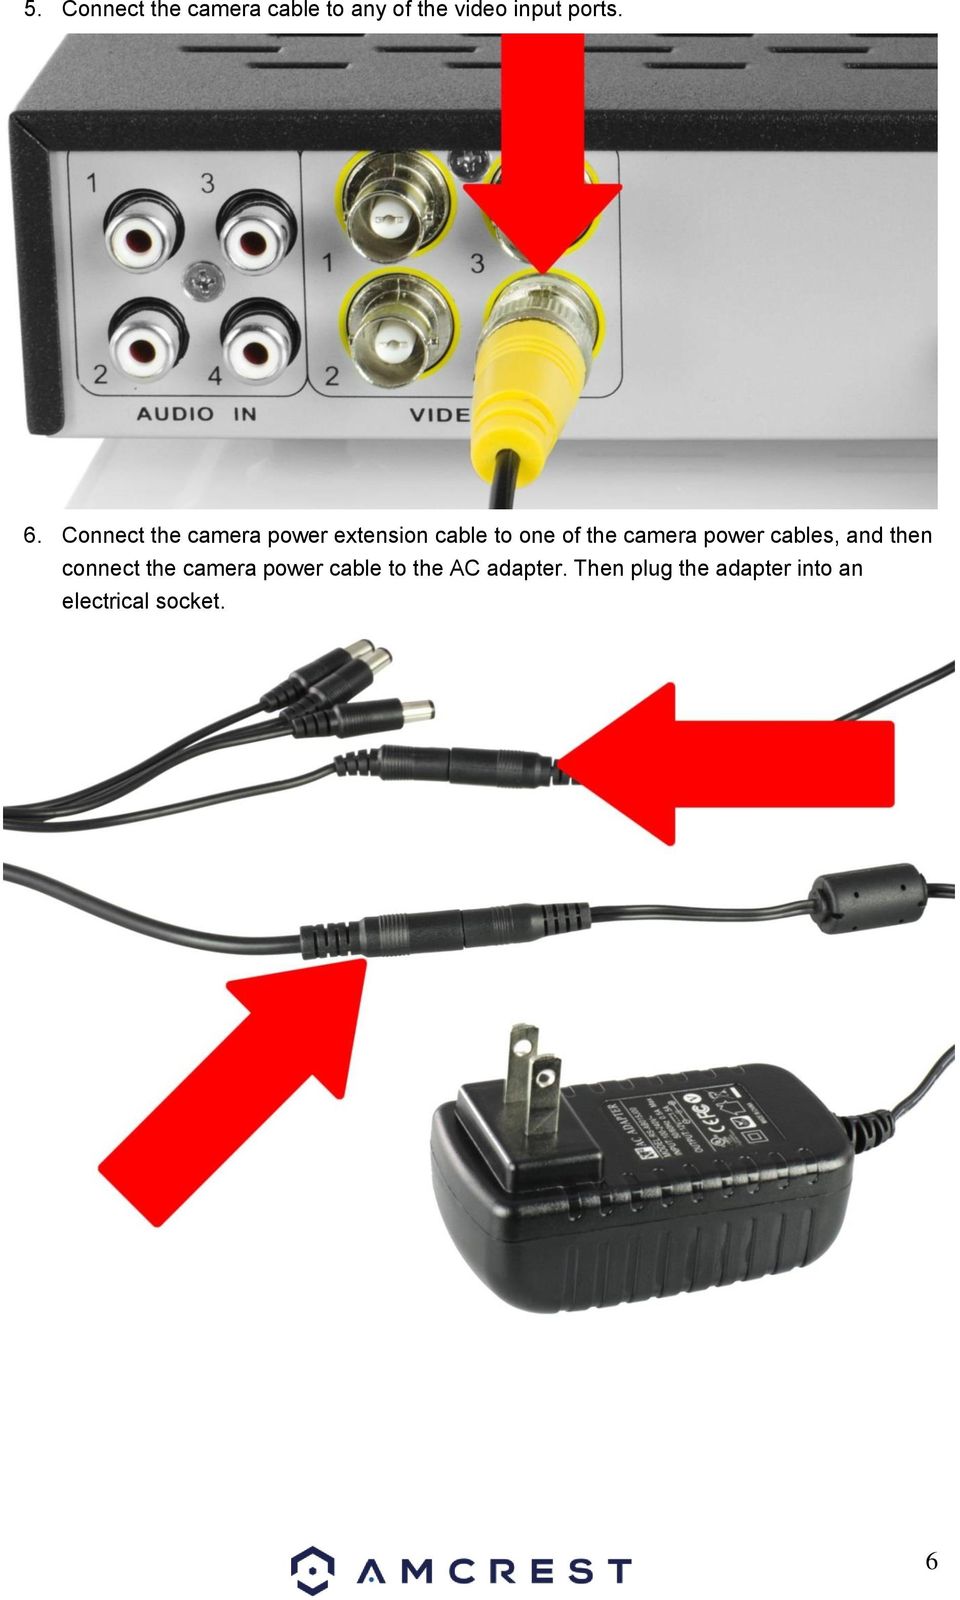 power cables, and then connect the camera power cable to the